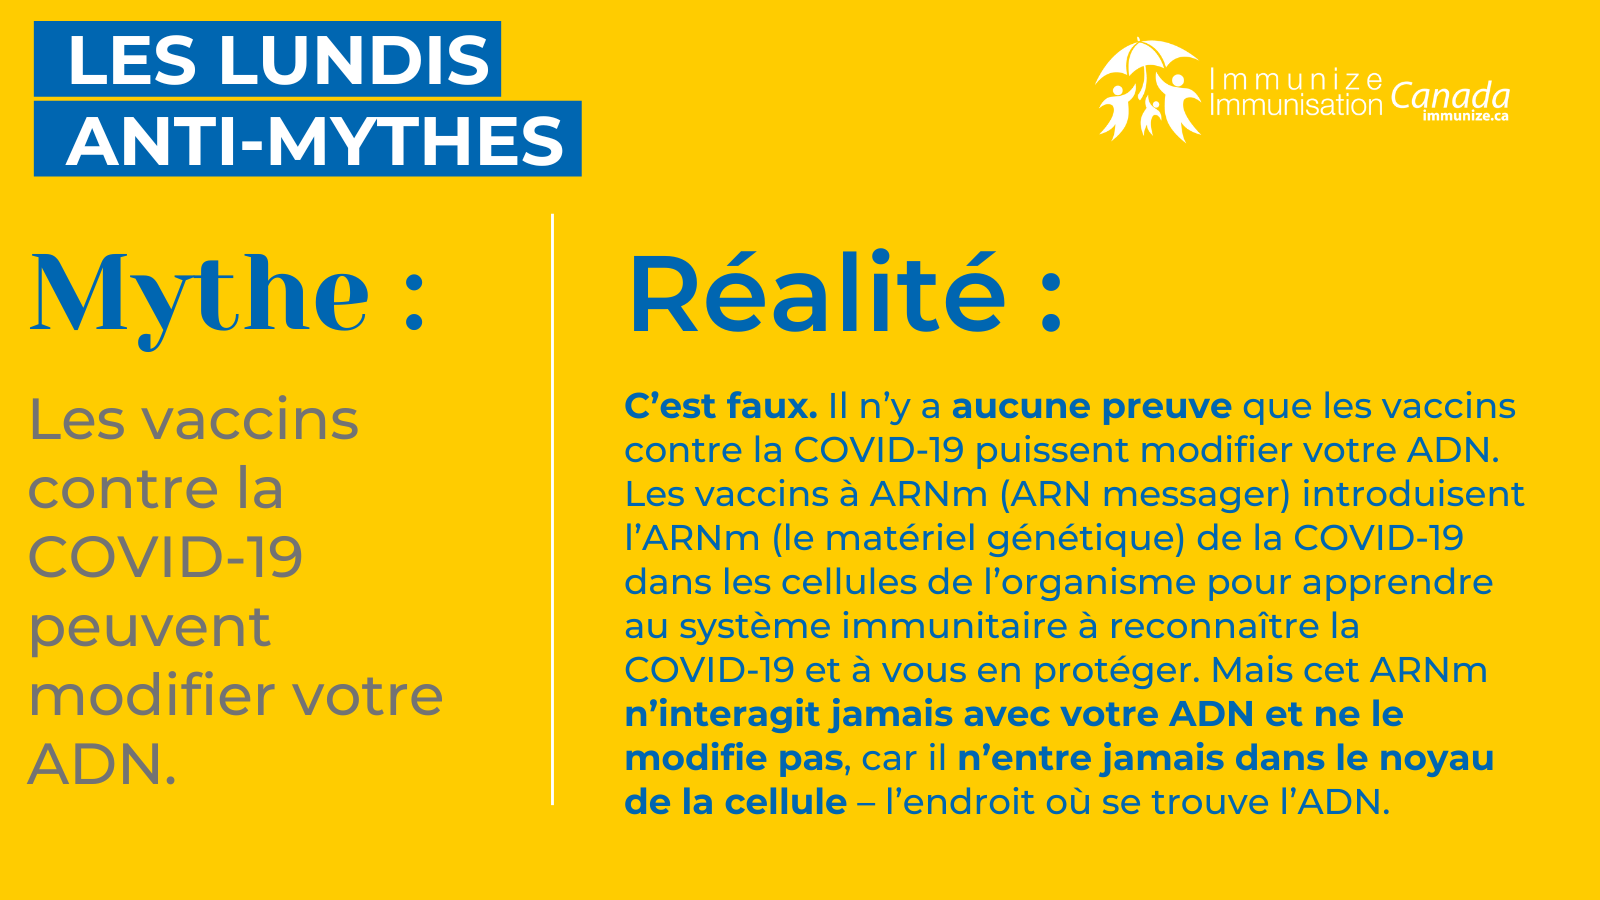 Les lundis anti-mythes - COVID-19 - image 6 pour Twitter/X